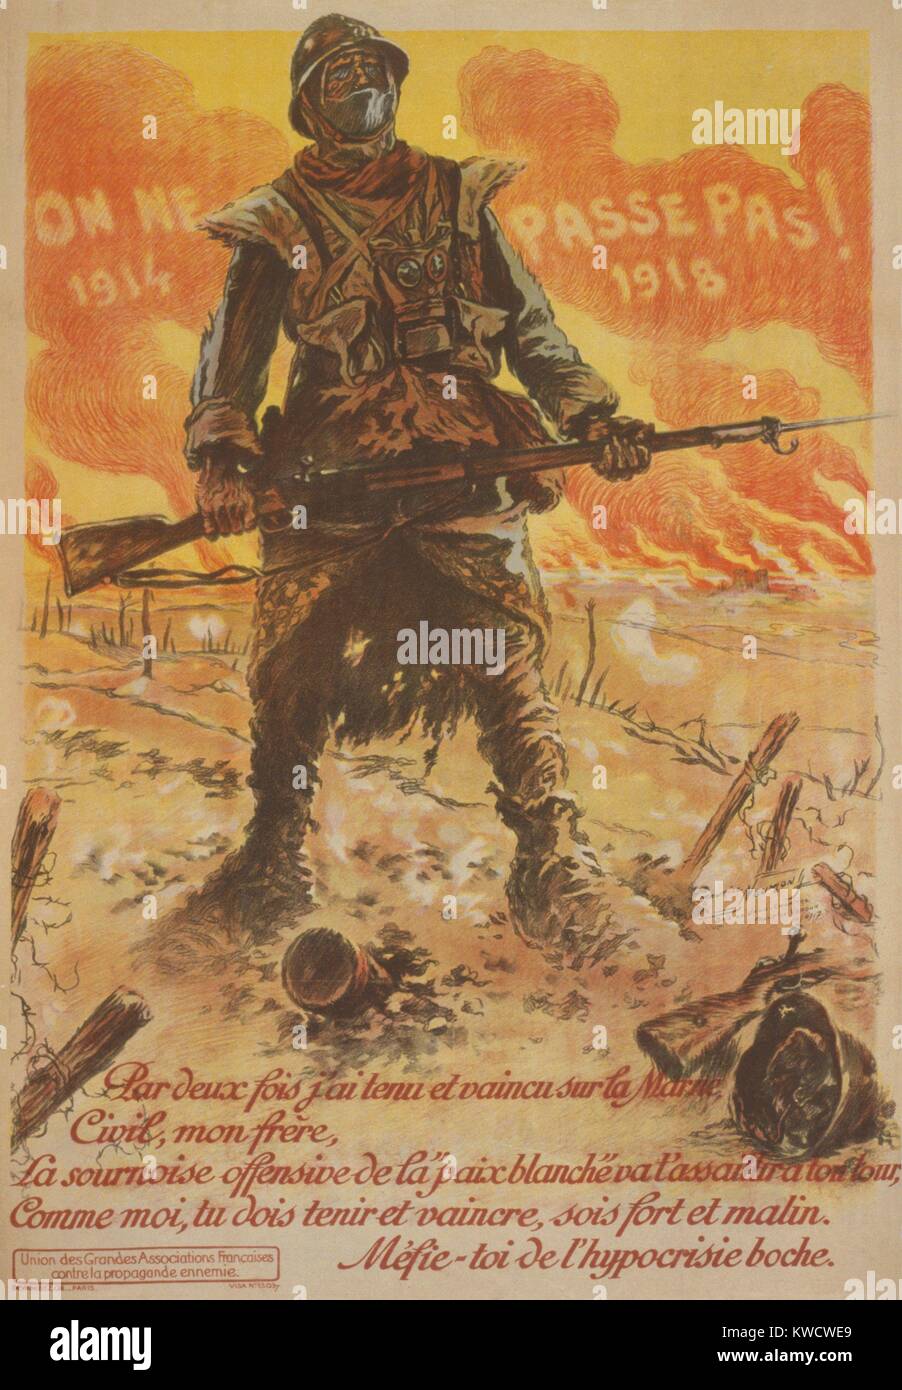 World War 1: Battle of Verdun. On ne passe pas, translated as they shall not pass became the battle cry of the French at Verdun. French poster commemorates the battle that killed 262,000 French and 142,000 German soldiers. (BSLOC 2013 1 96) Stock Photo